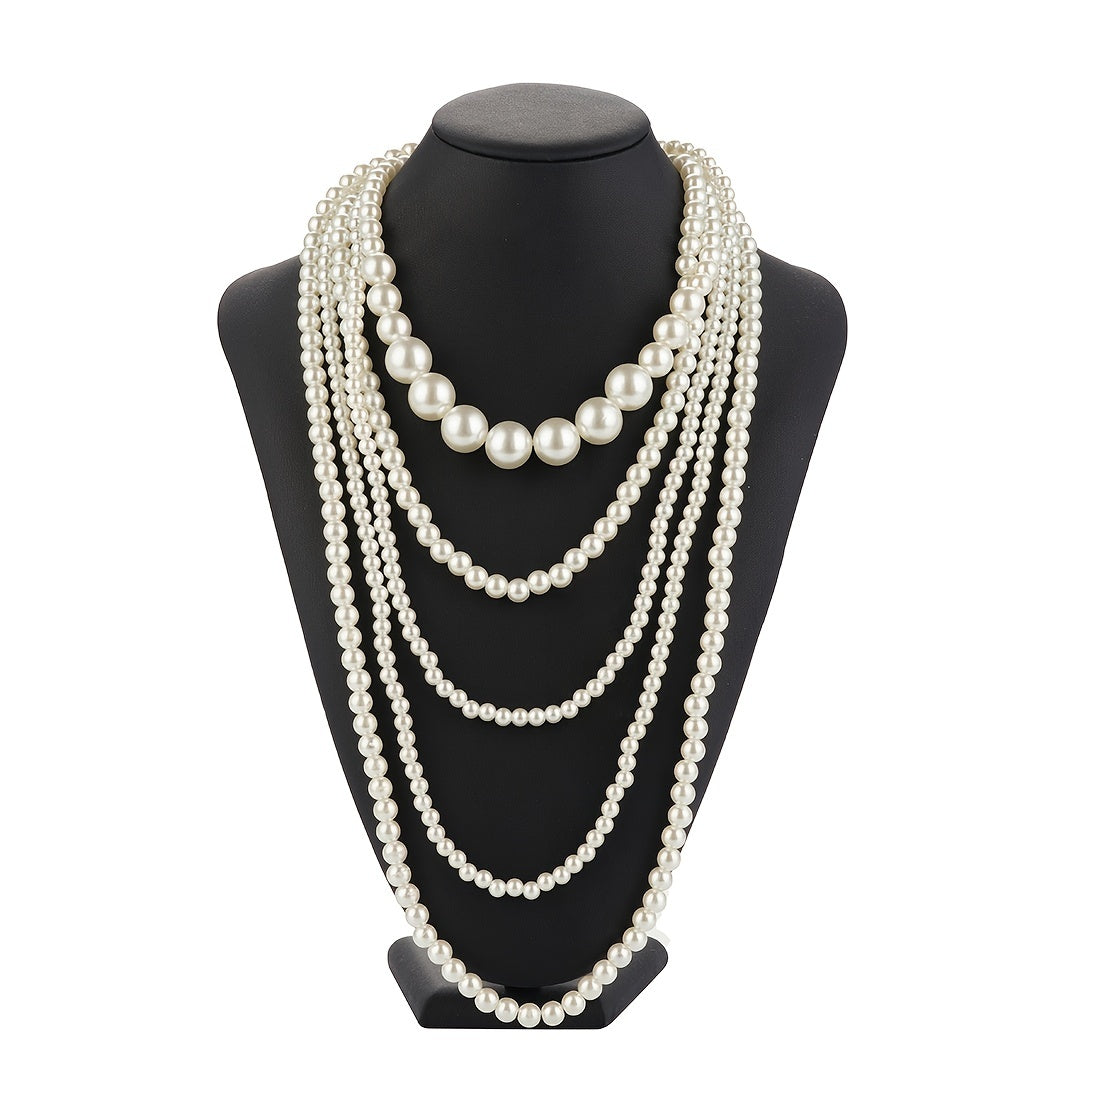 1pcs Multi-Layer Elegant Imitation Pearl Necklace for Women - Perfect for Cheongsam and Chinese New Year Outfits